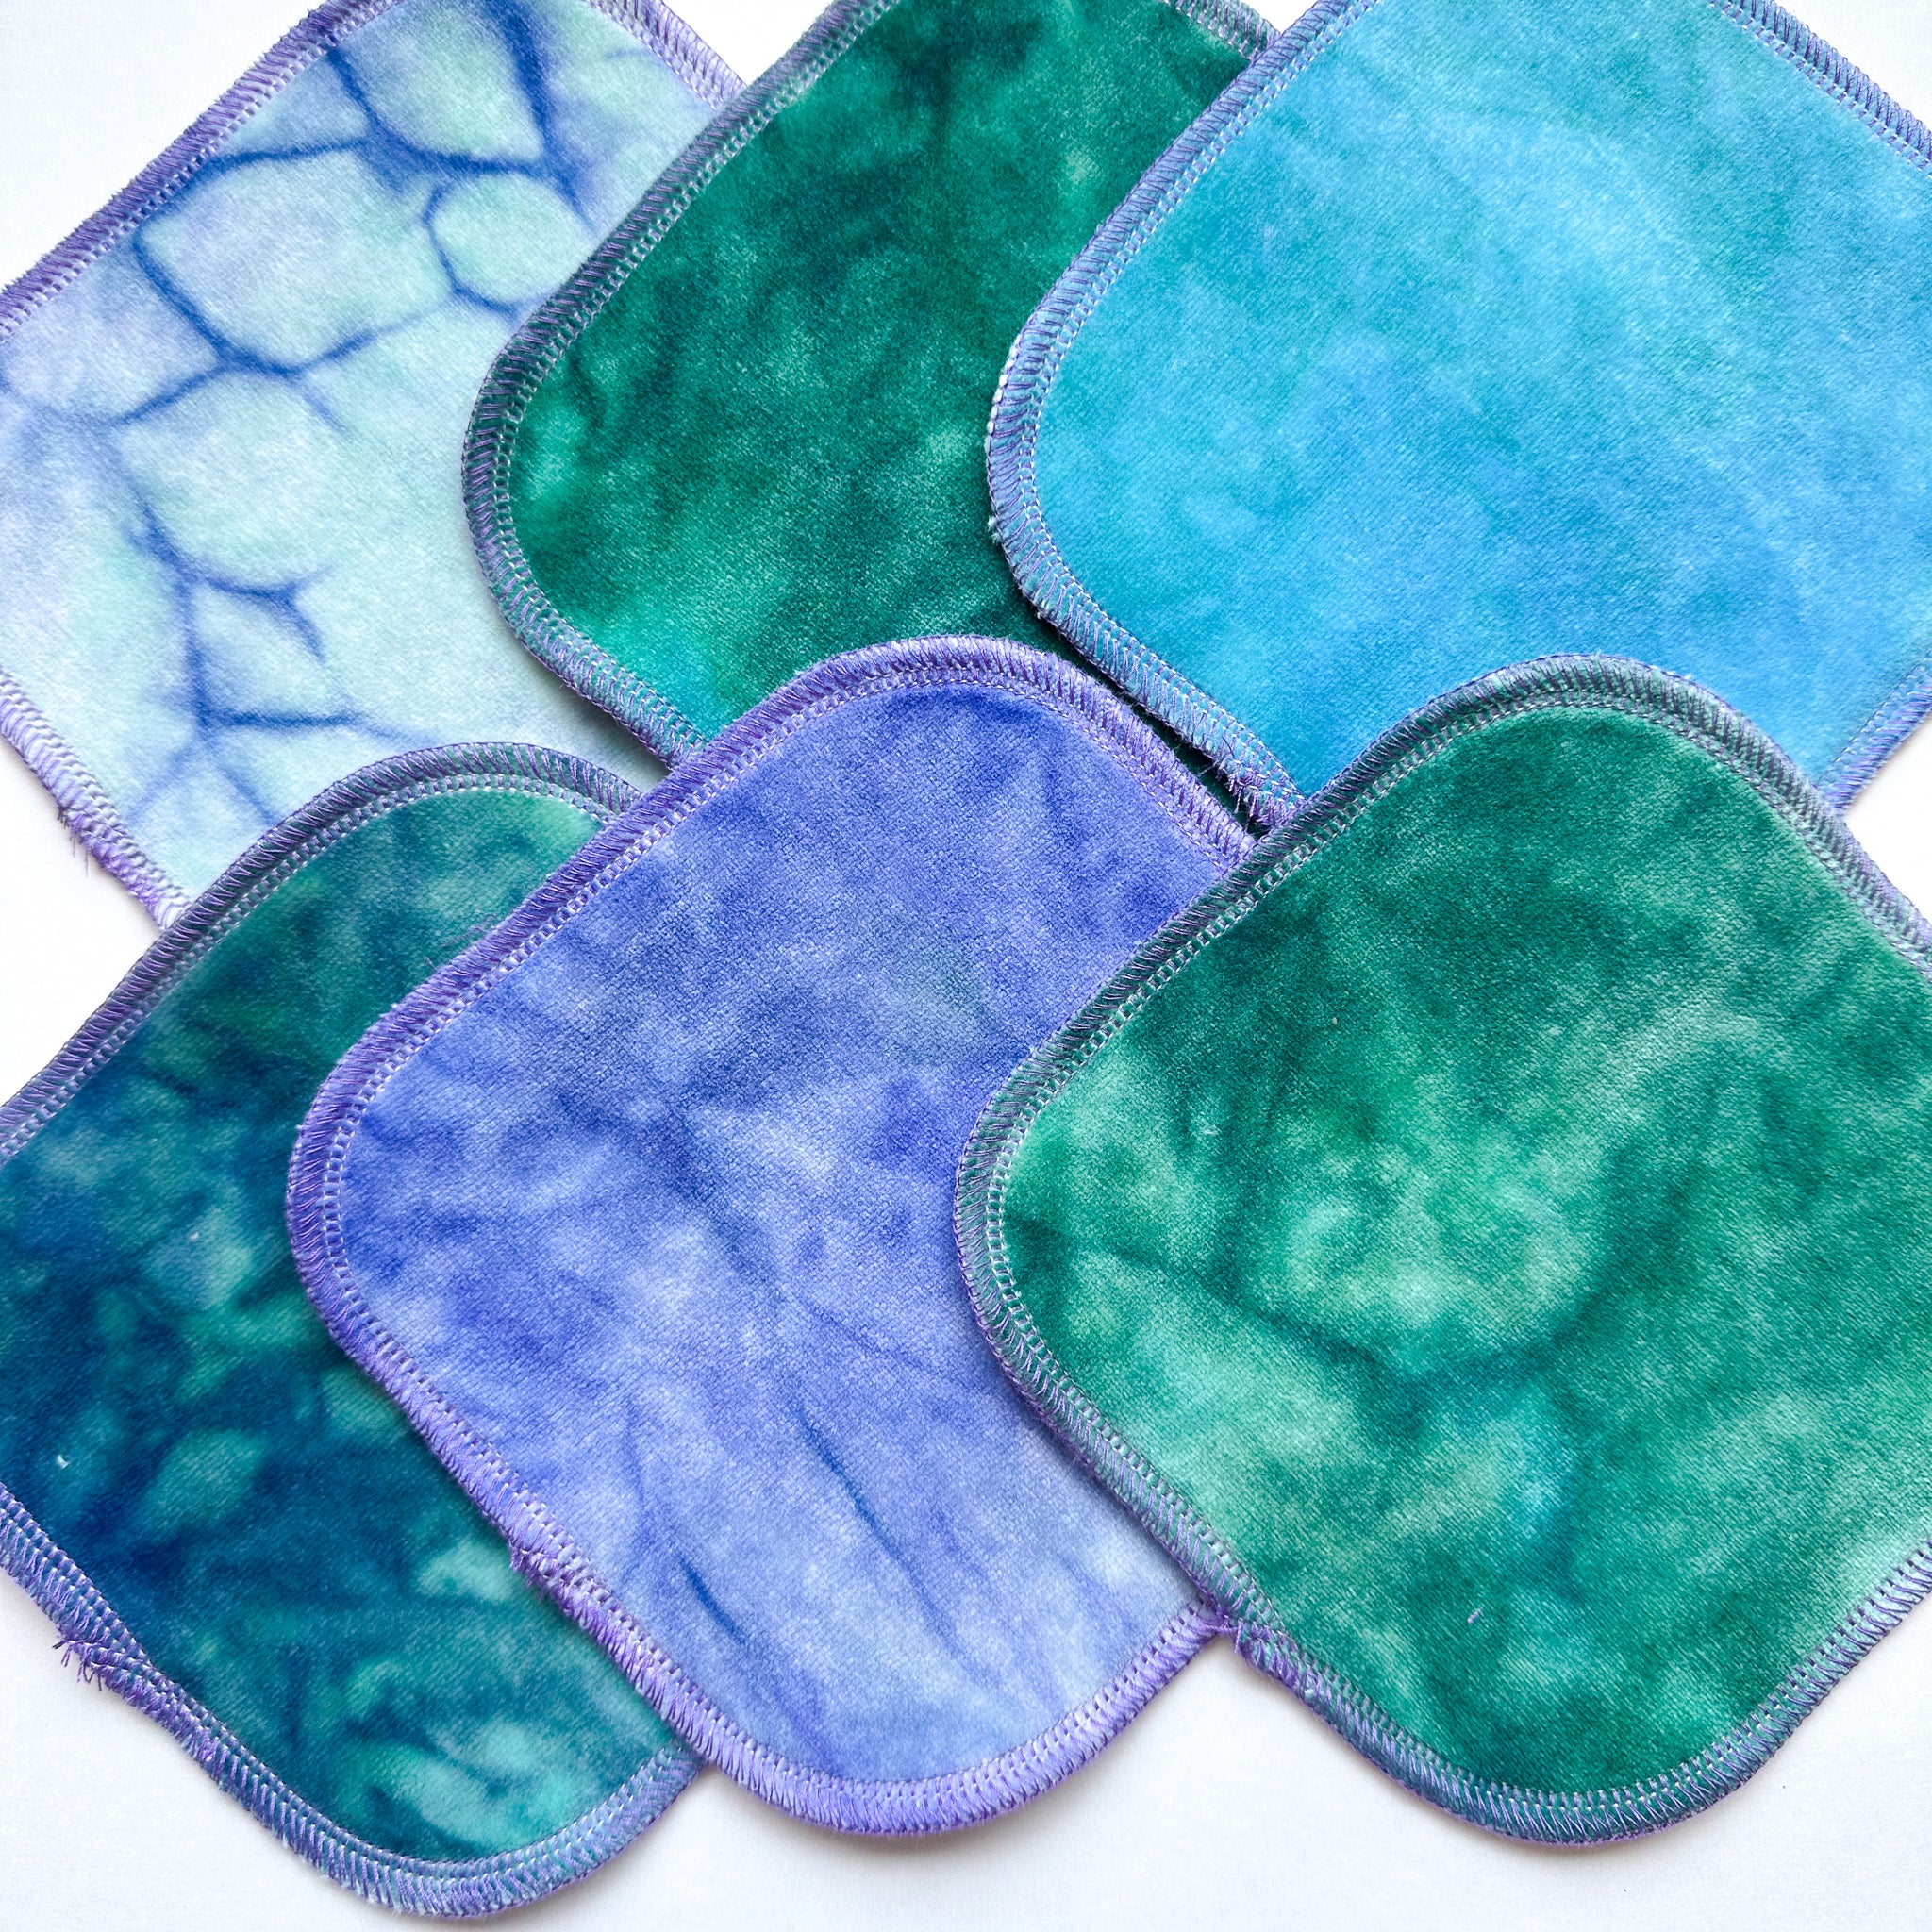 Mermaid | 6-pack Reusable Cloth Wipes | Organic Cotton\Bamboo Blend